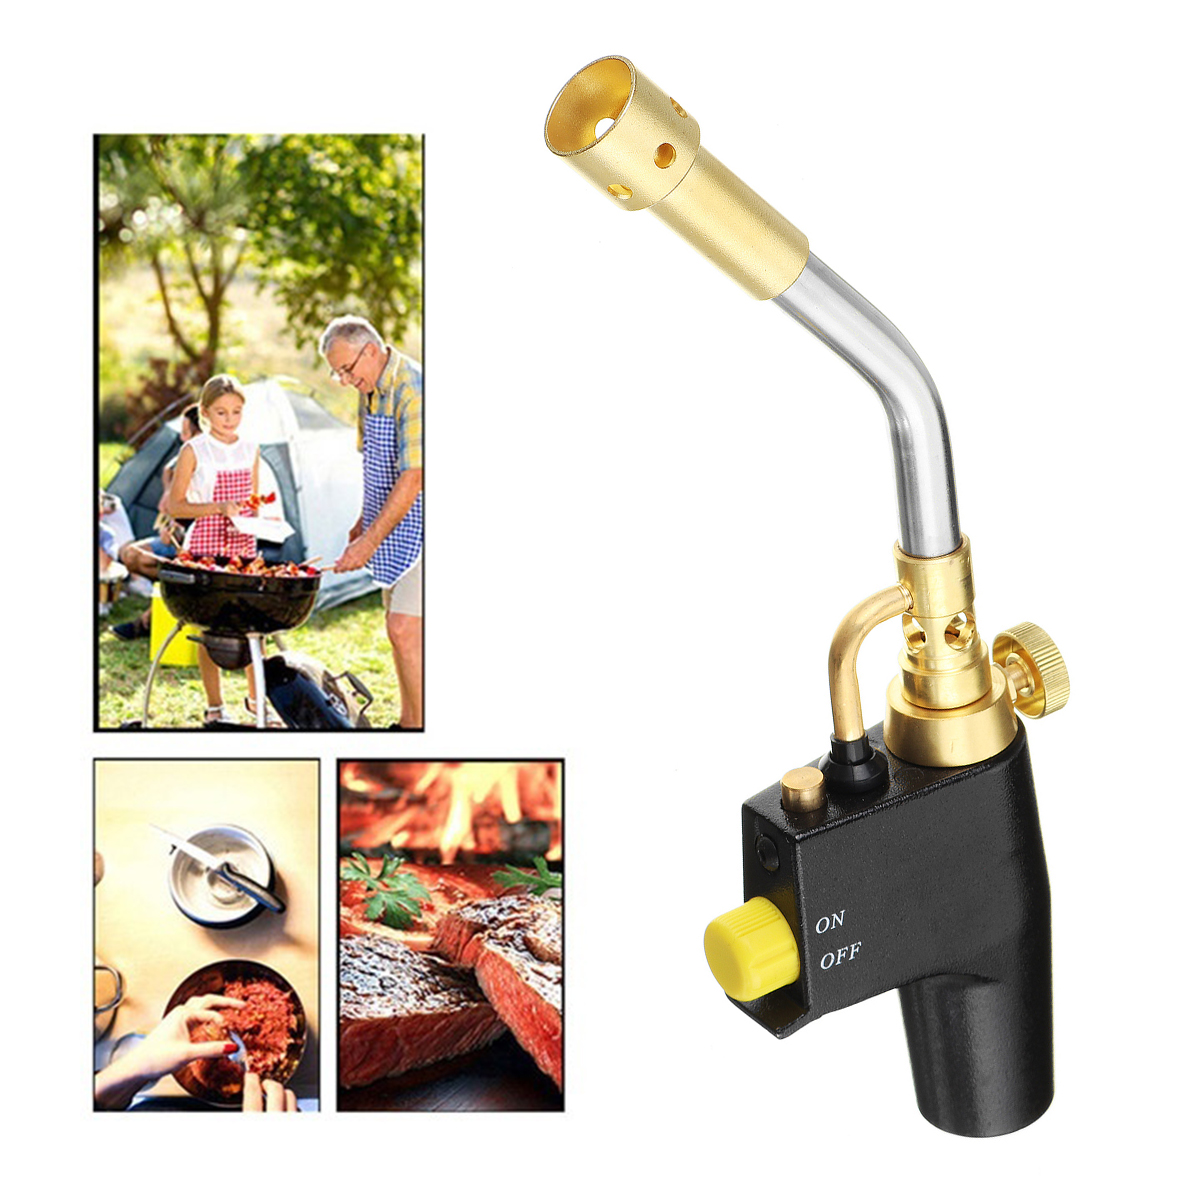 TS8000-Type-High-Temperature-Brass-Mapp-Gas-Torch-Propane-Welding-Pipe-With-a-Replaceable-Brass-Weld-1717065-2